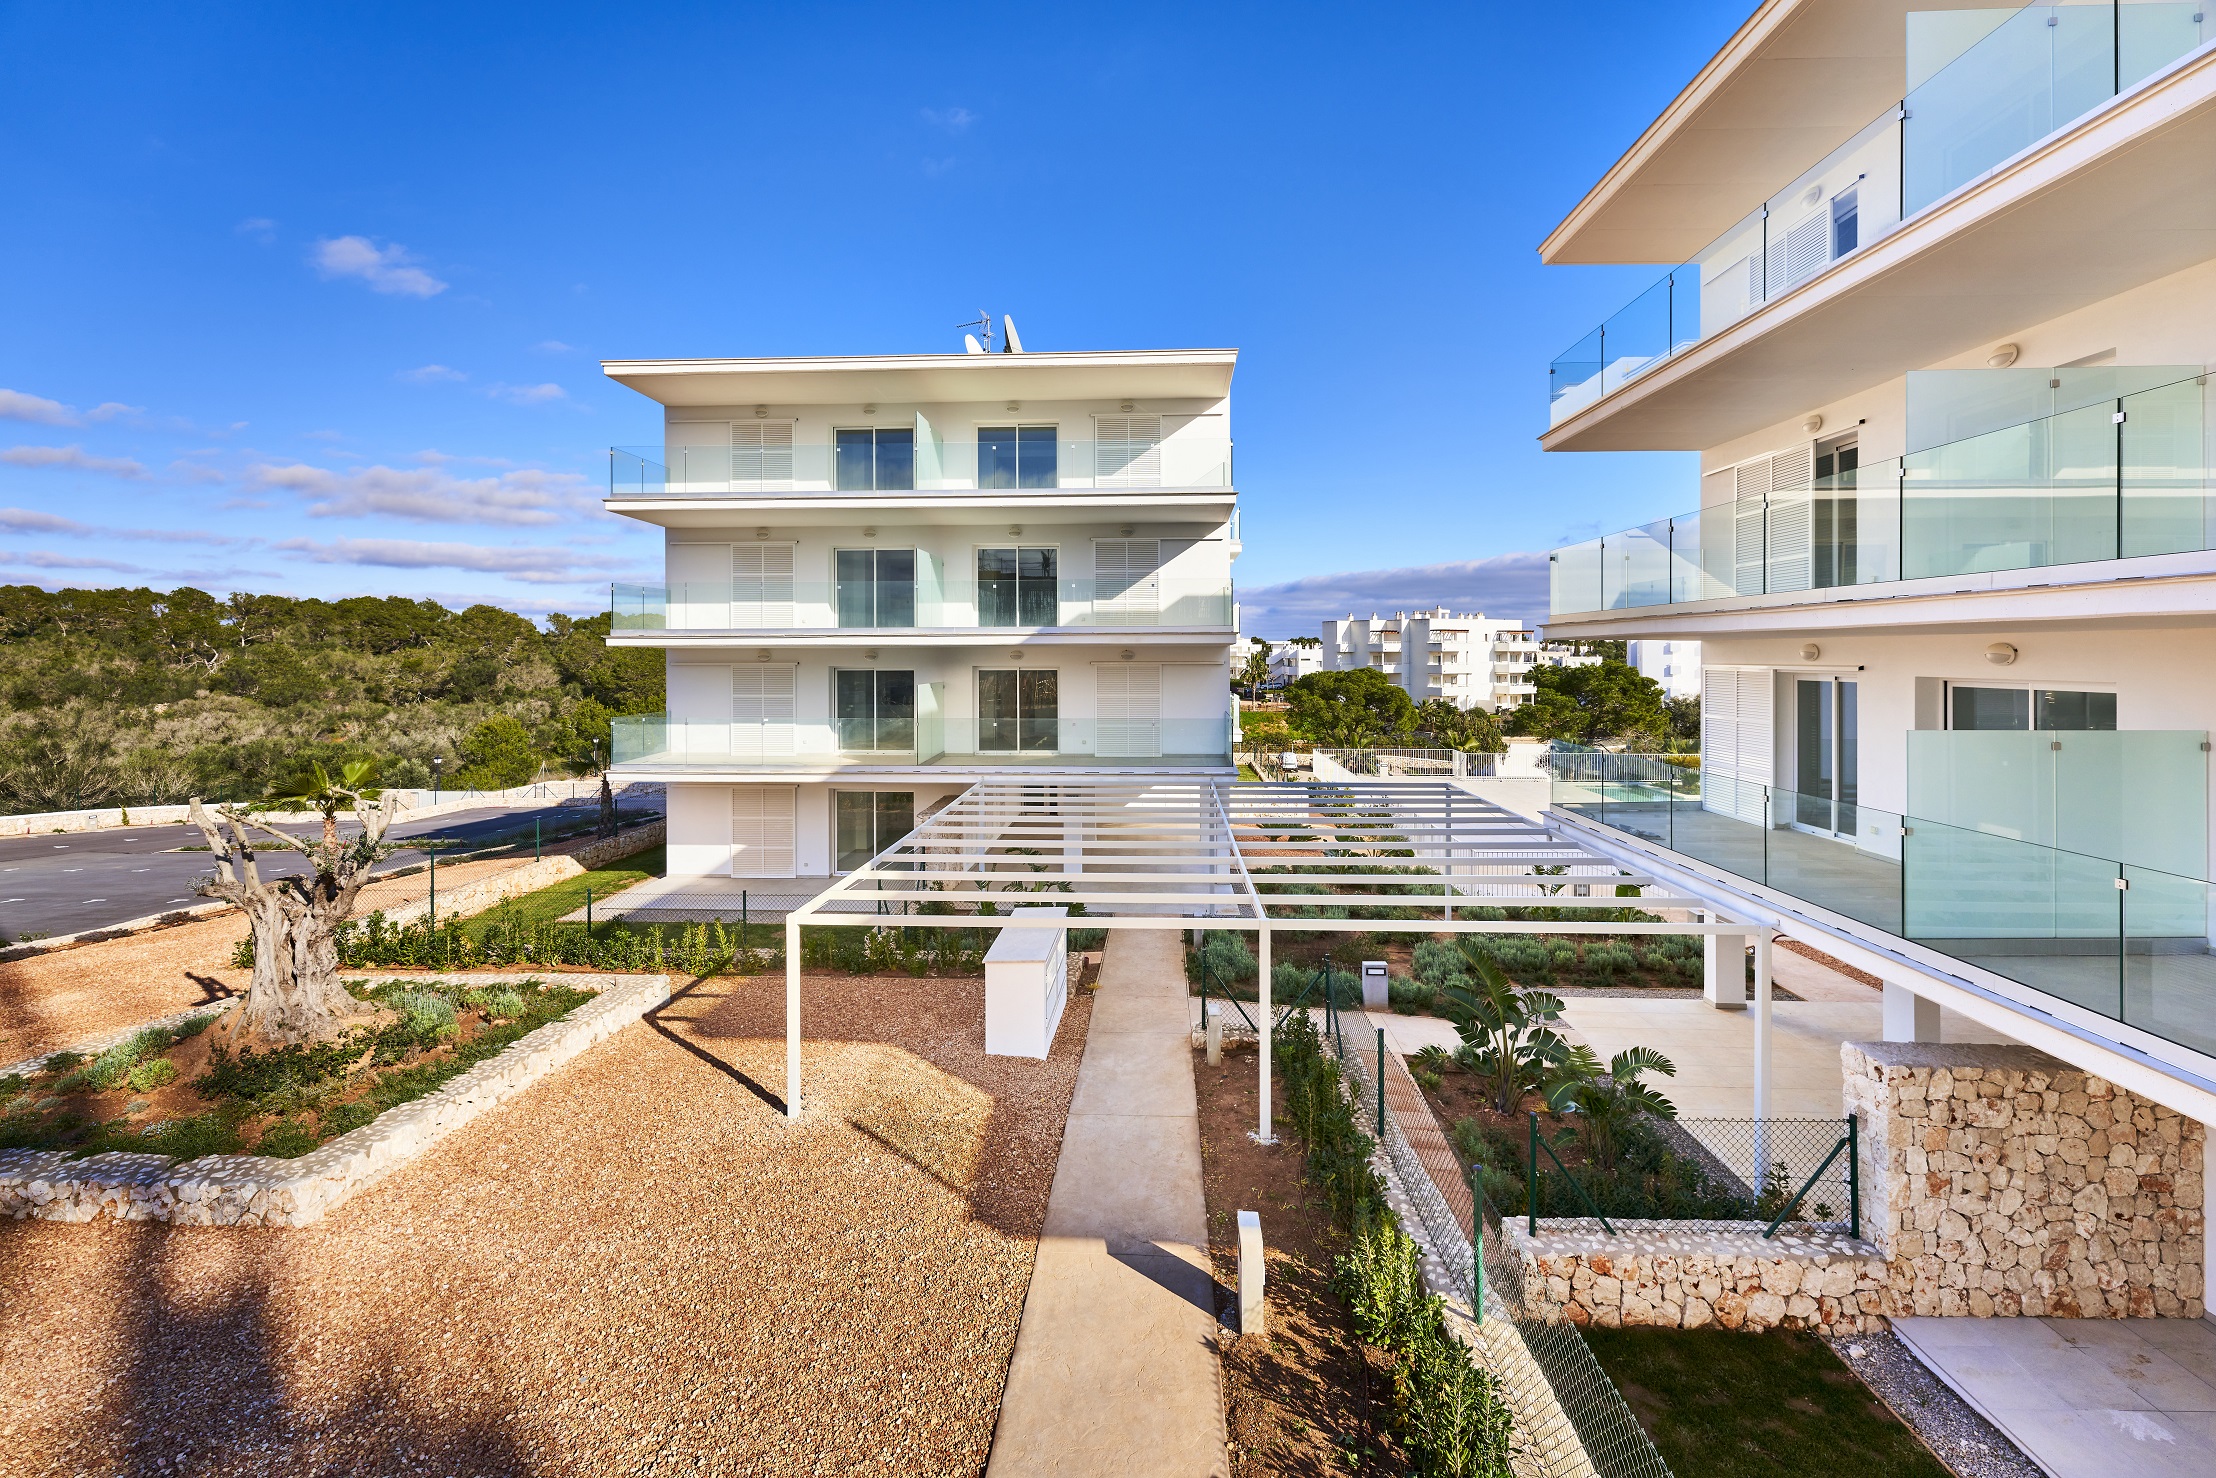 Property Image 480649-cala-d-or-apartment-2-1